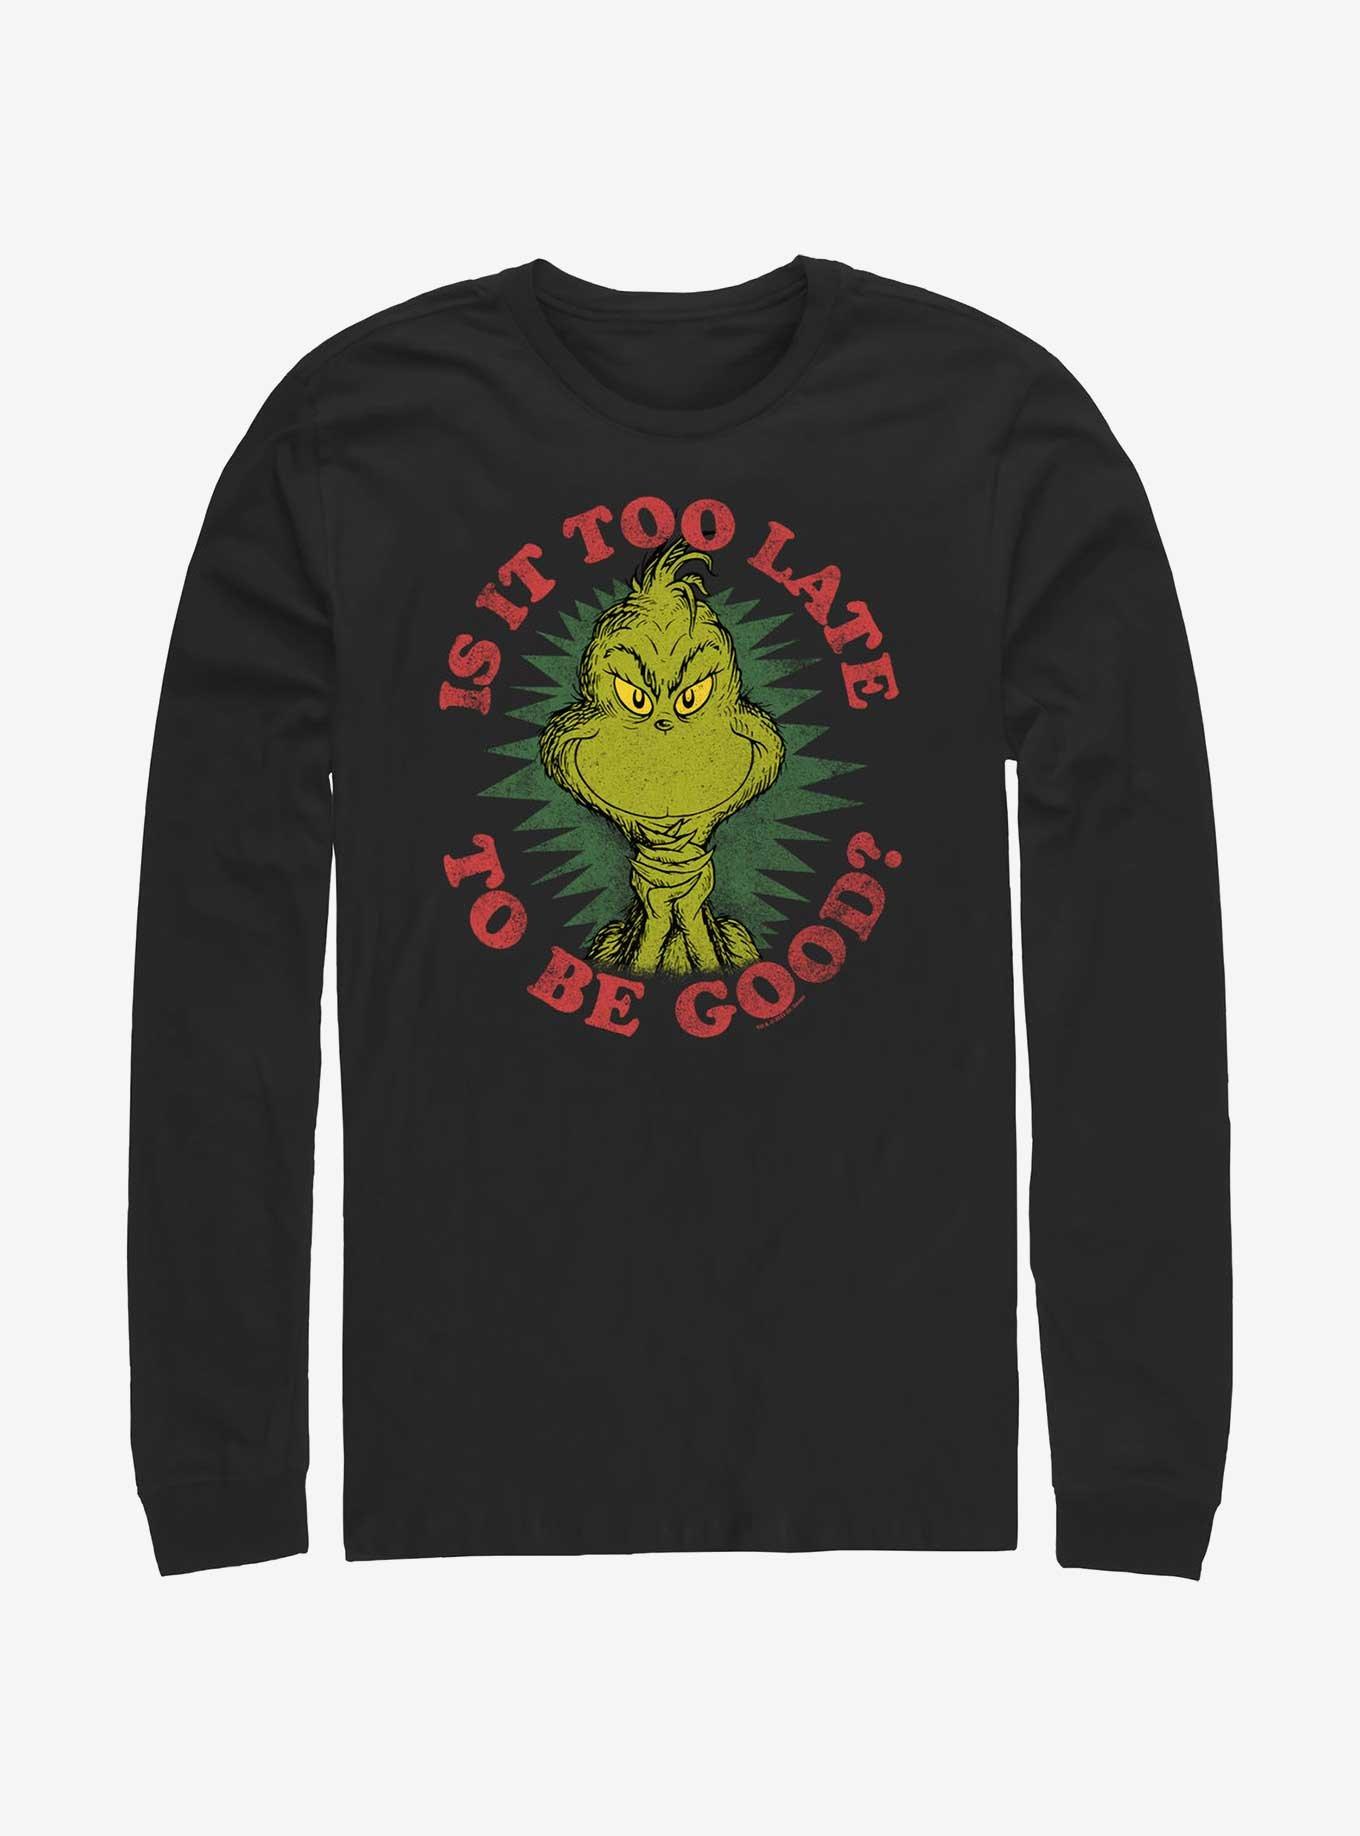 Dr. Seuss Grinch Is It Too Late To Be Good Long-Sleeve T-Shirt, BLACK, hi-res